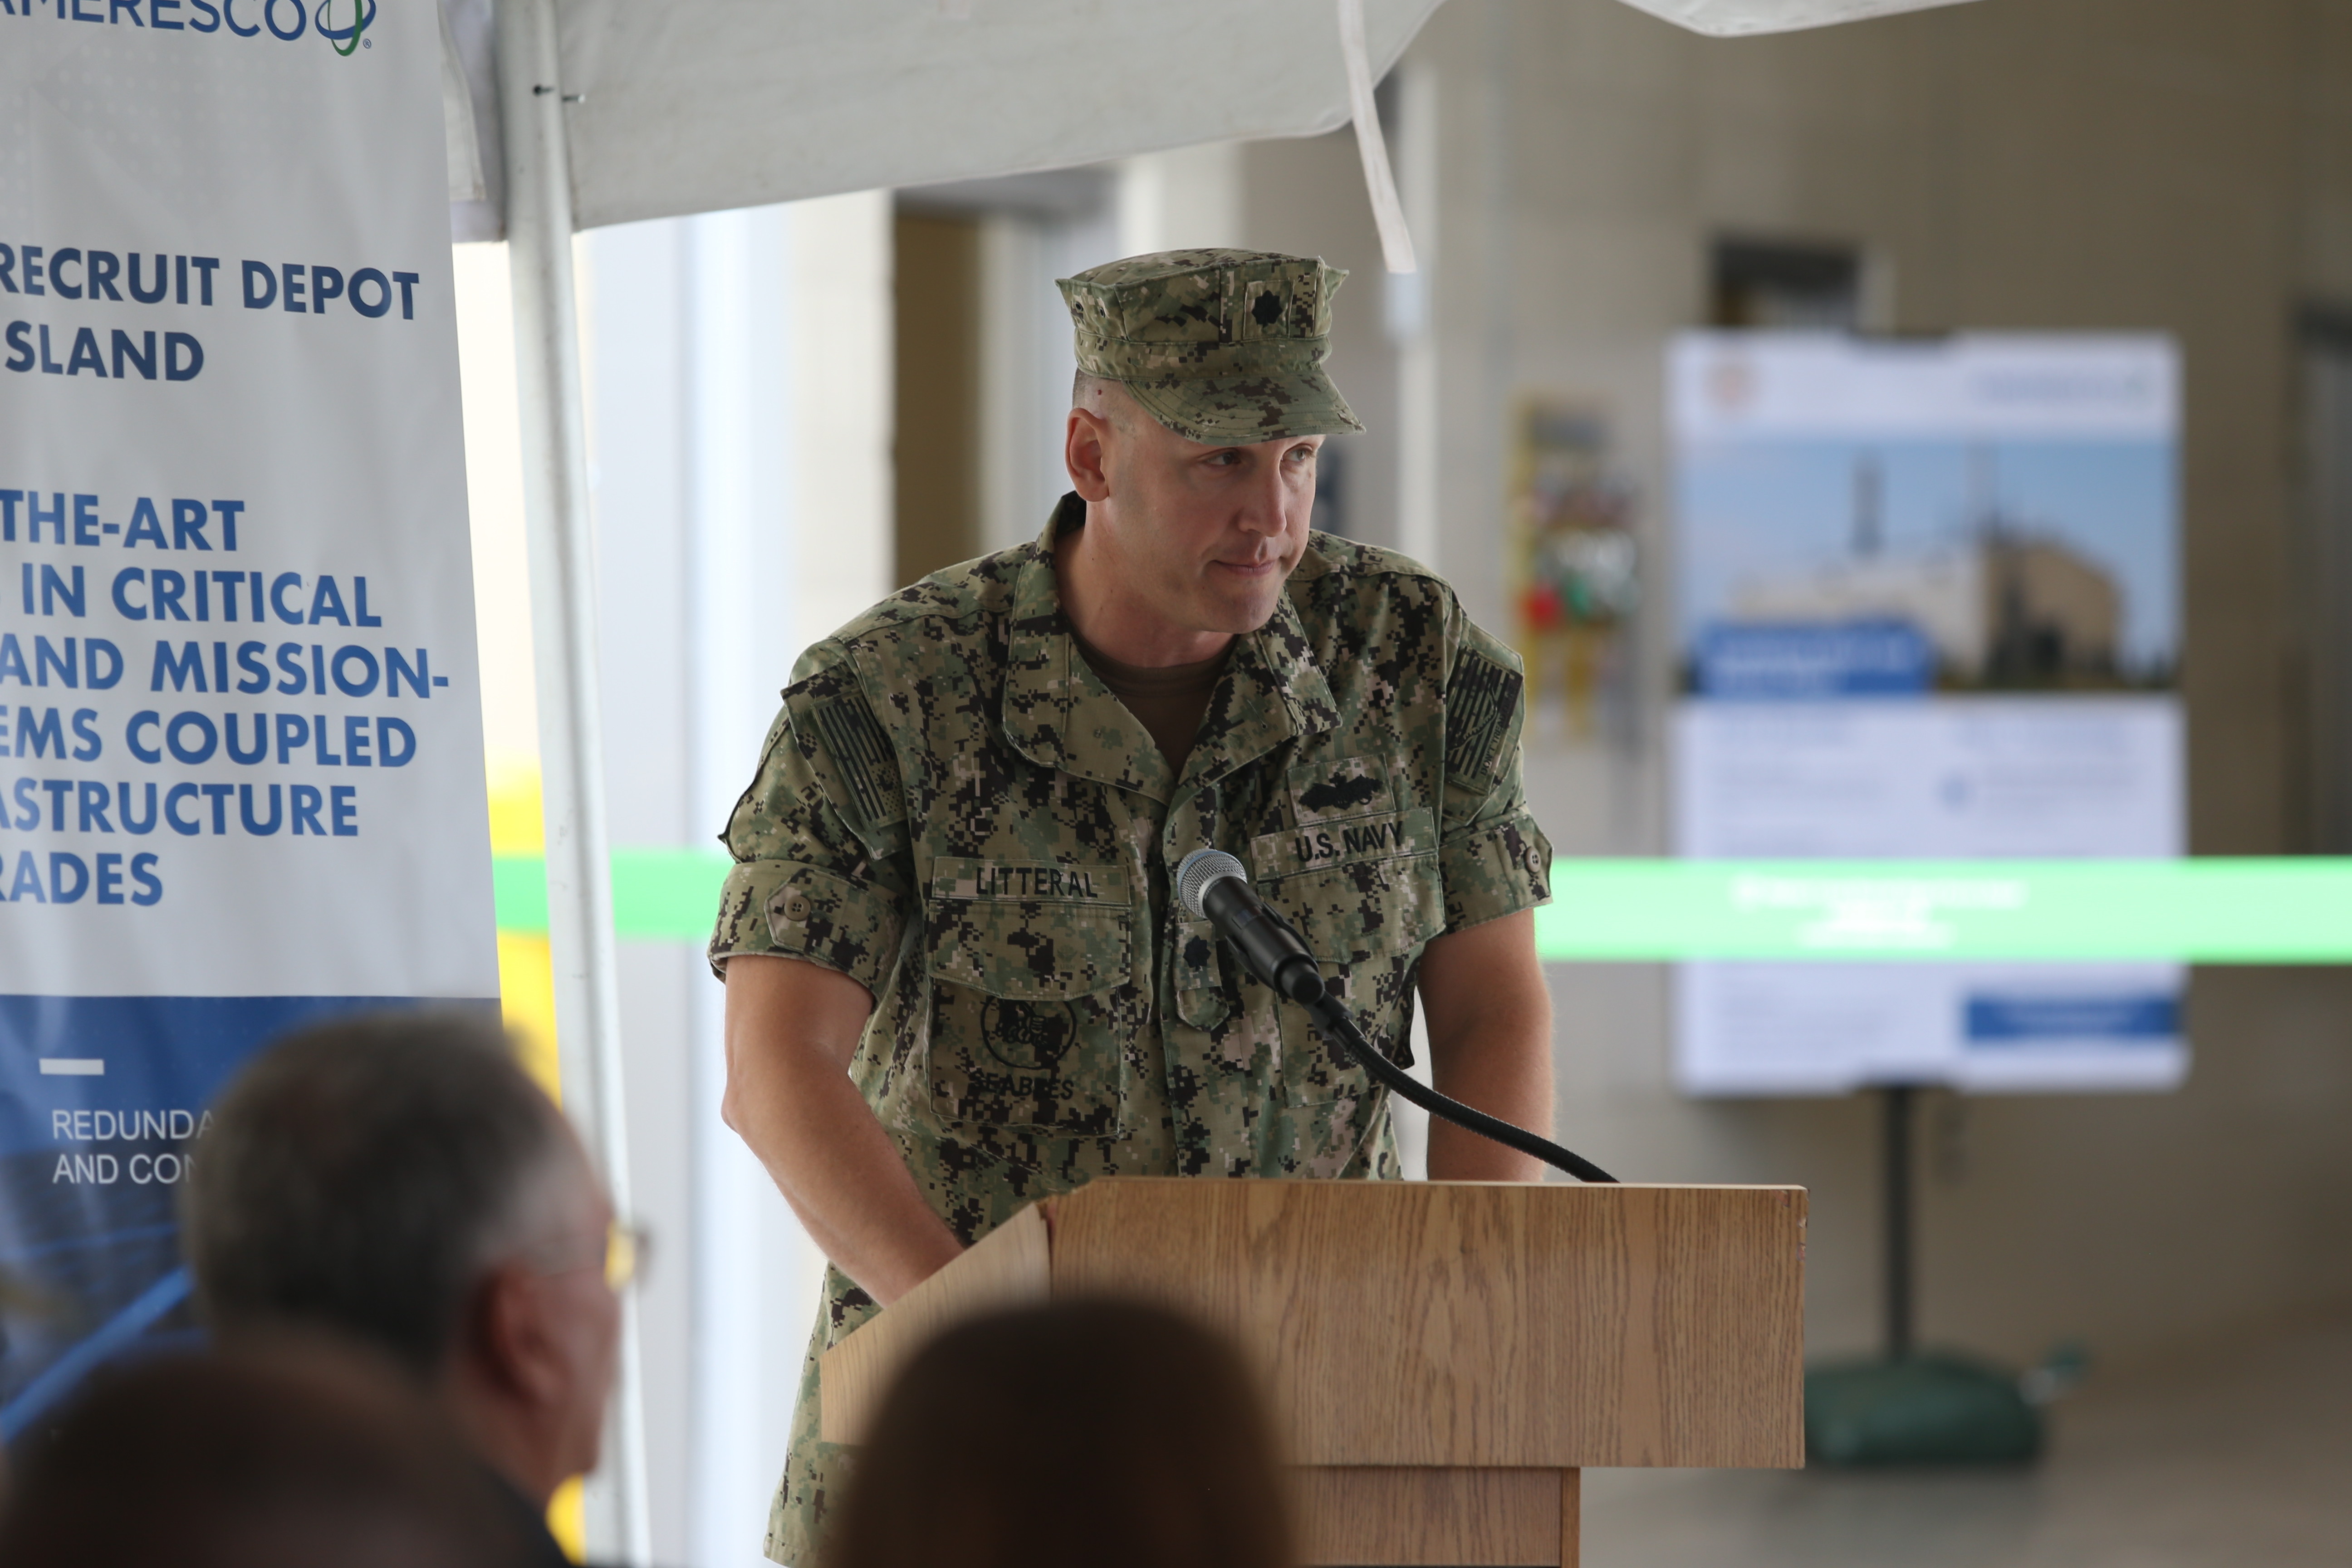 A Marine in uniform leaning over a podium facing a crowd of people.